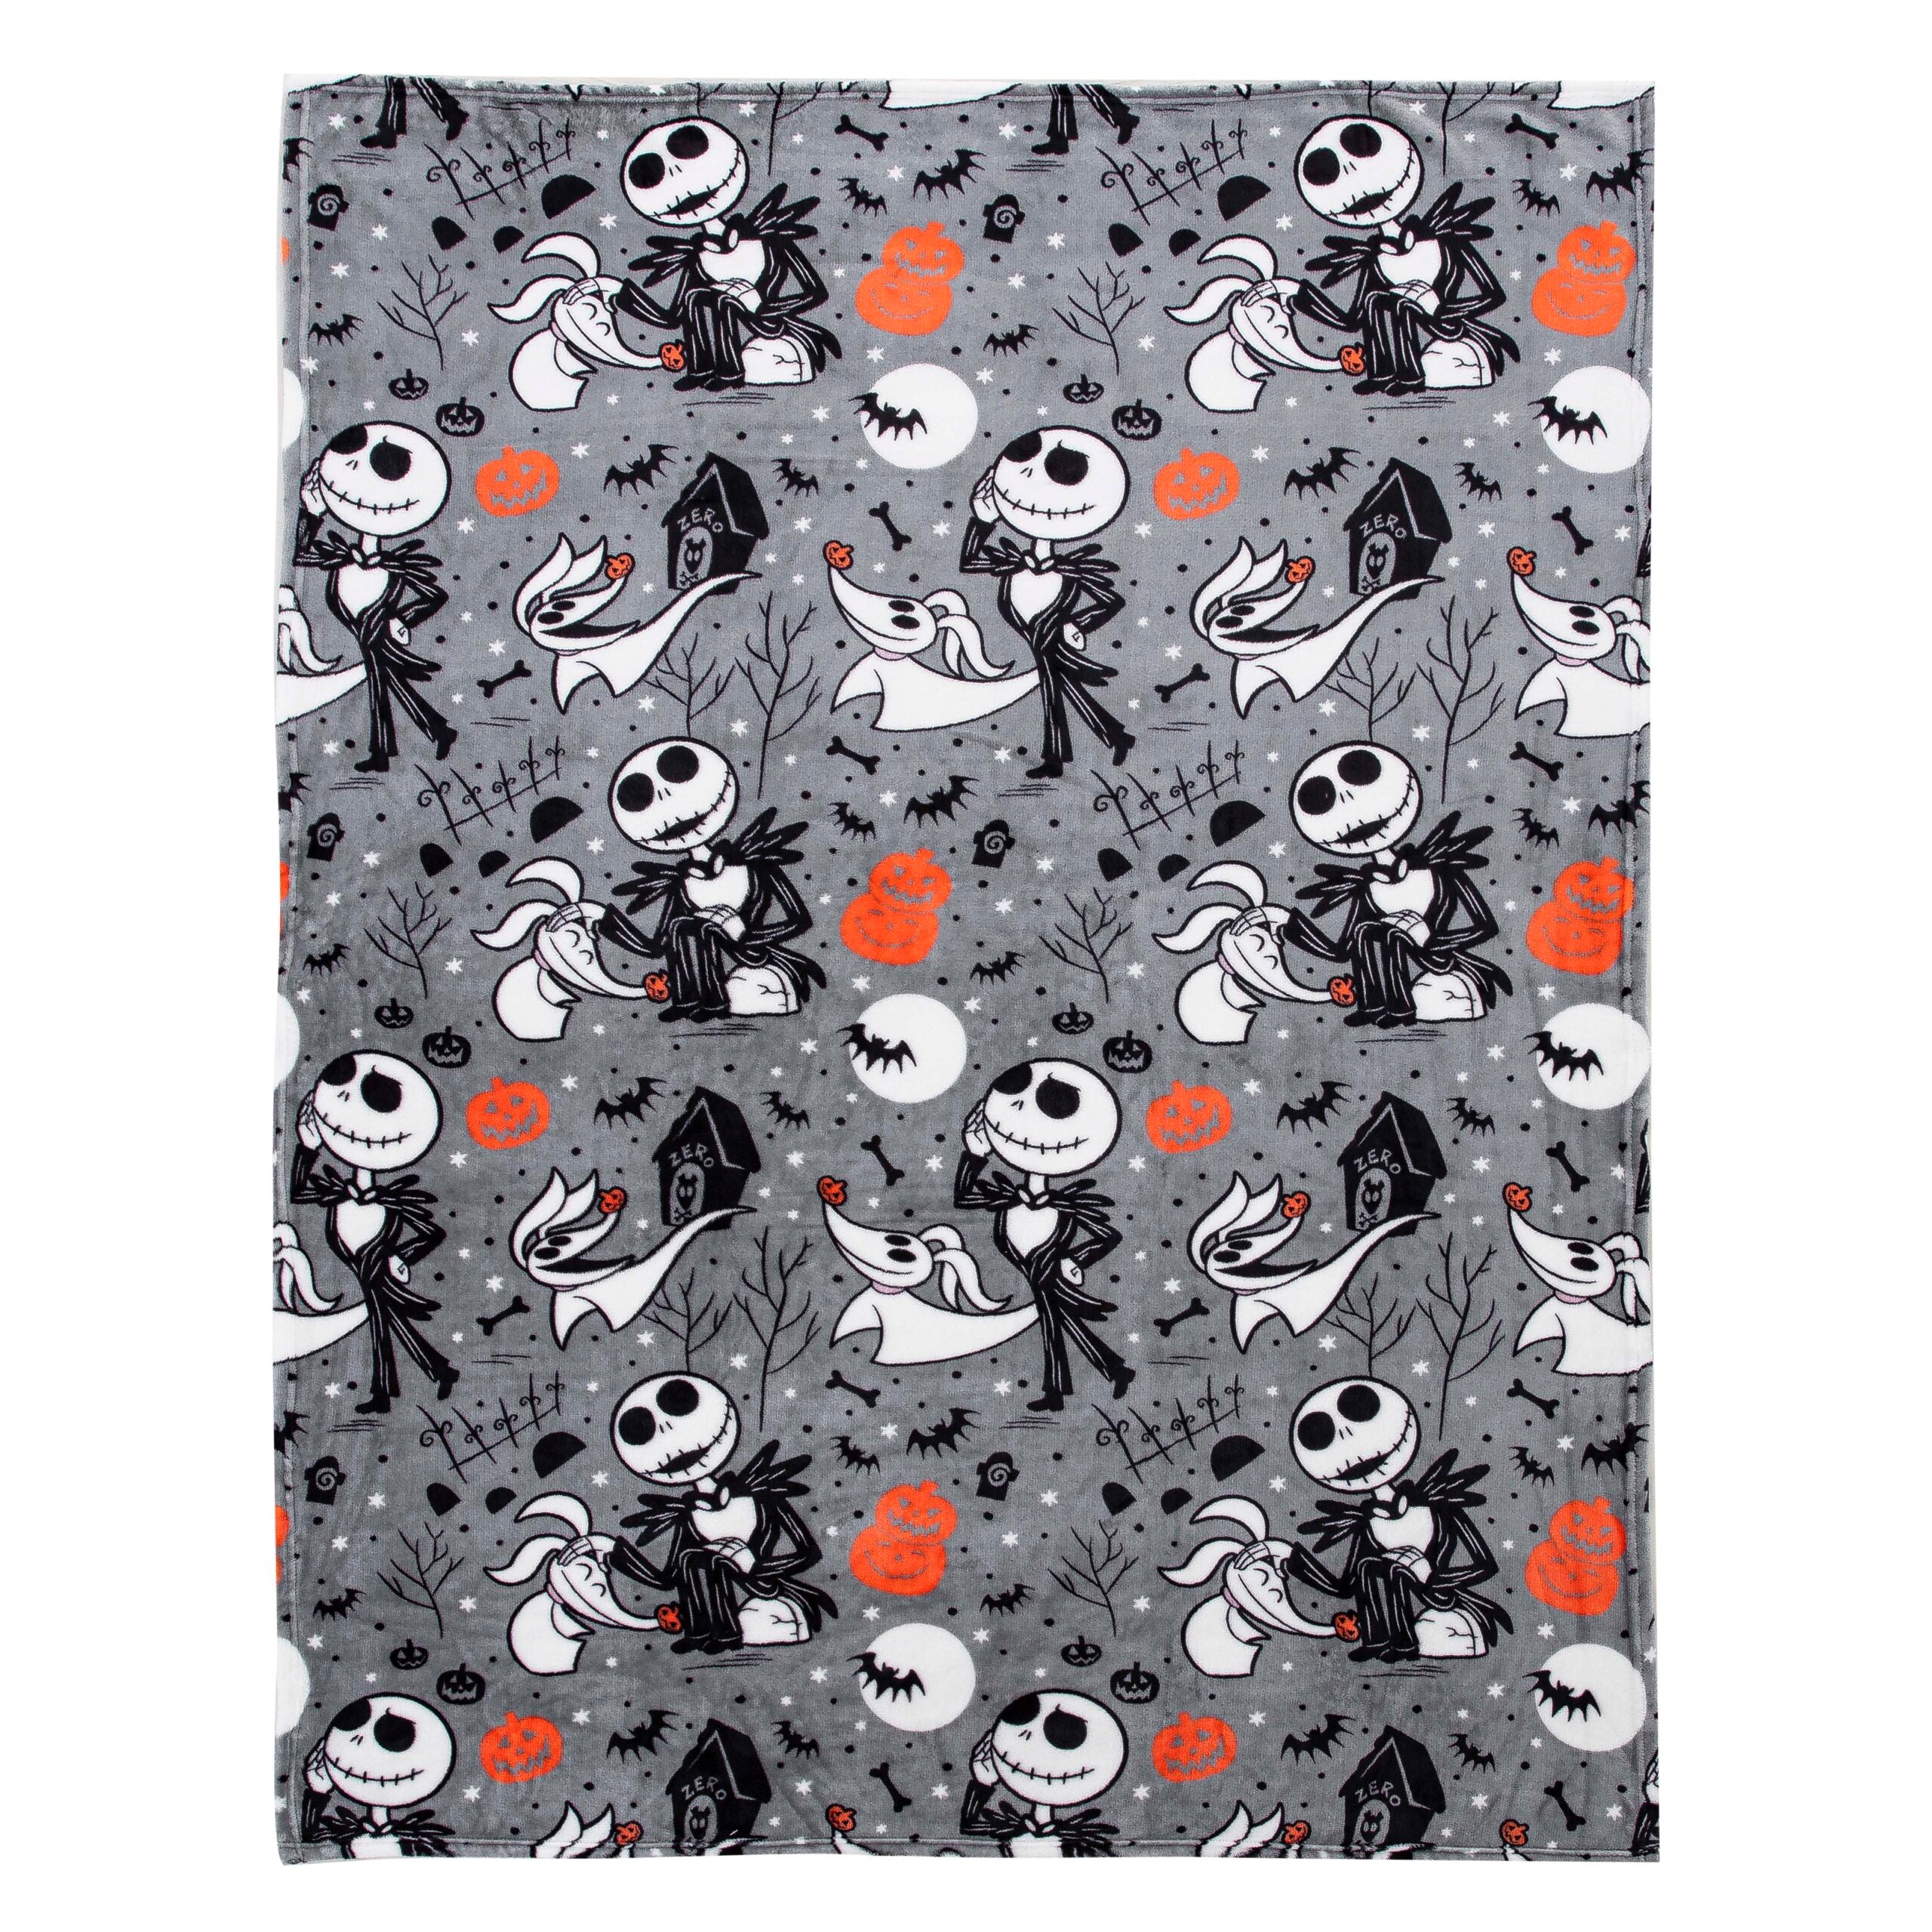 Disney Nightmare Before Christmas Best Friends Silk Touch Throw Blanket 50x70 Inches